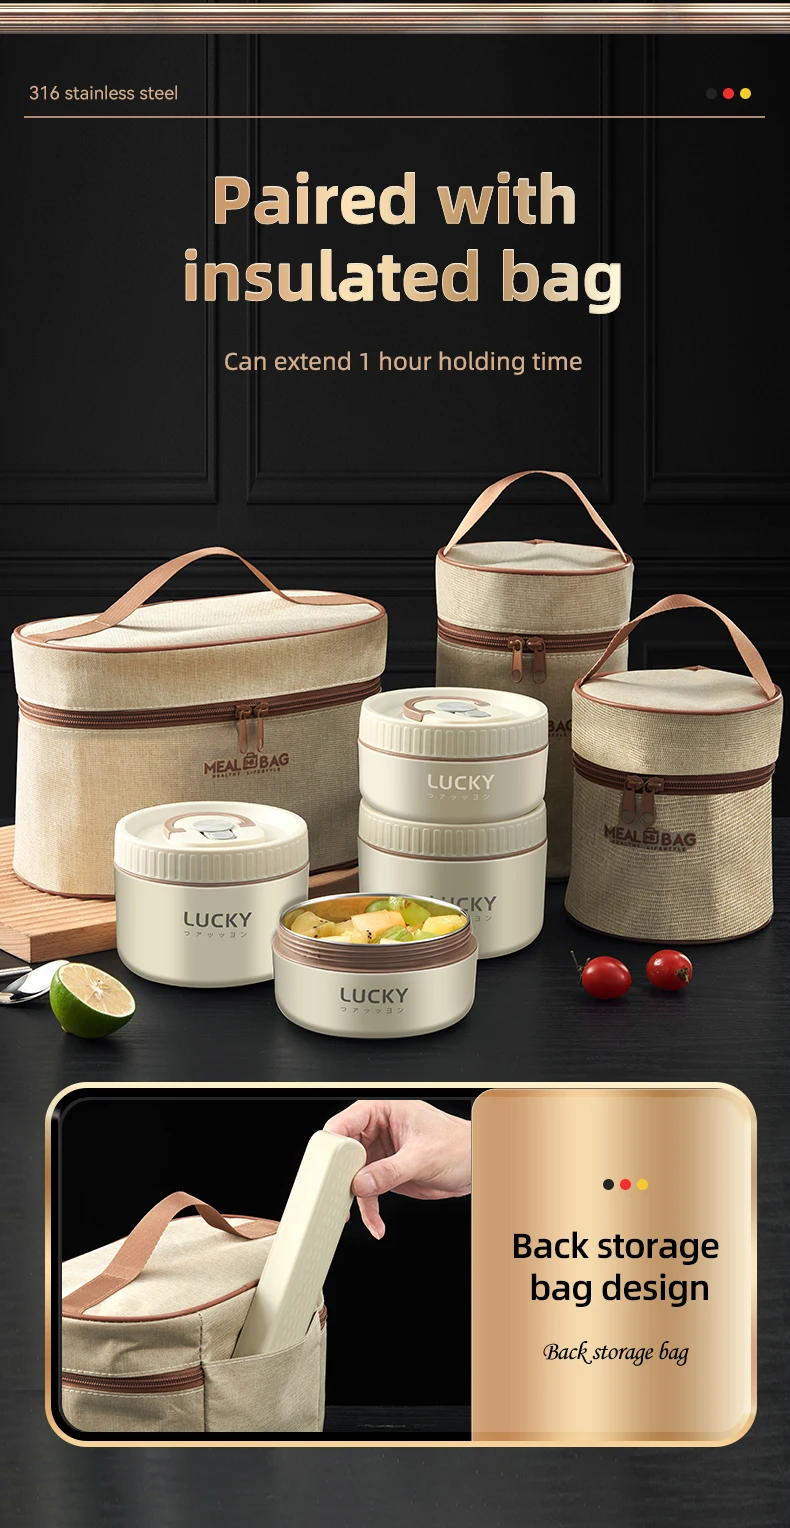 WORTHBUY 18/8 Stainless Steel Thermal Food Container Bento Lunch Box Set, Portable Keep Warm Lunch Container With Insulated Bag